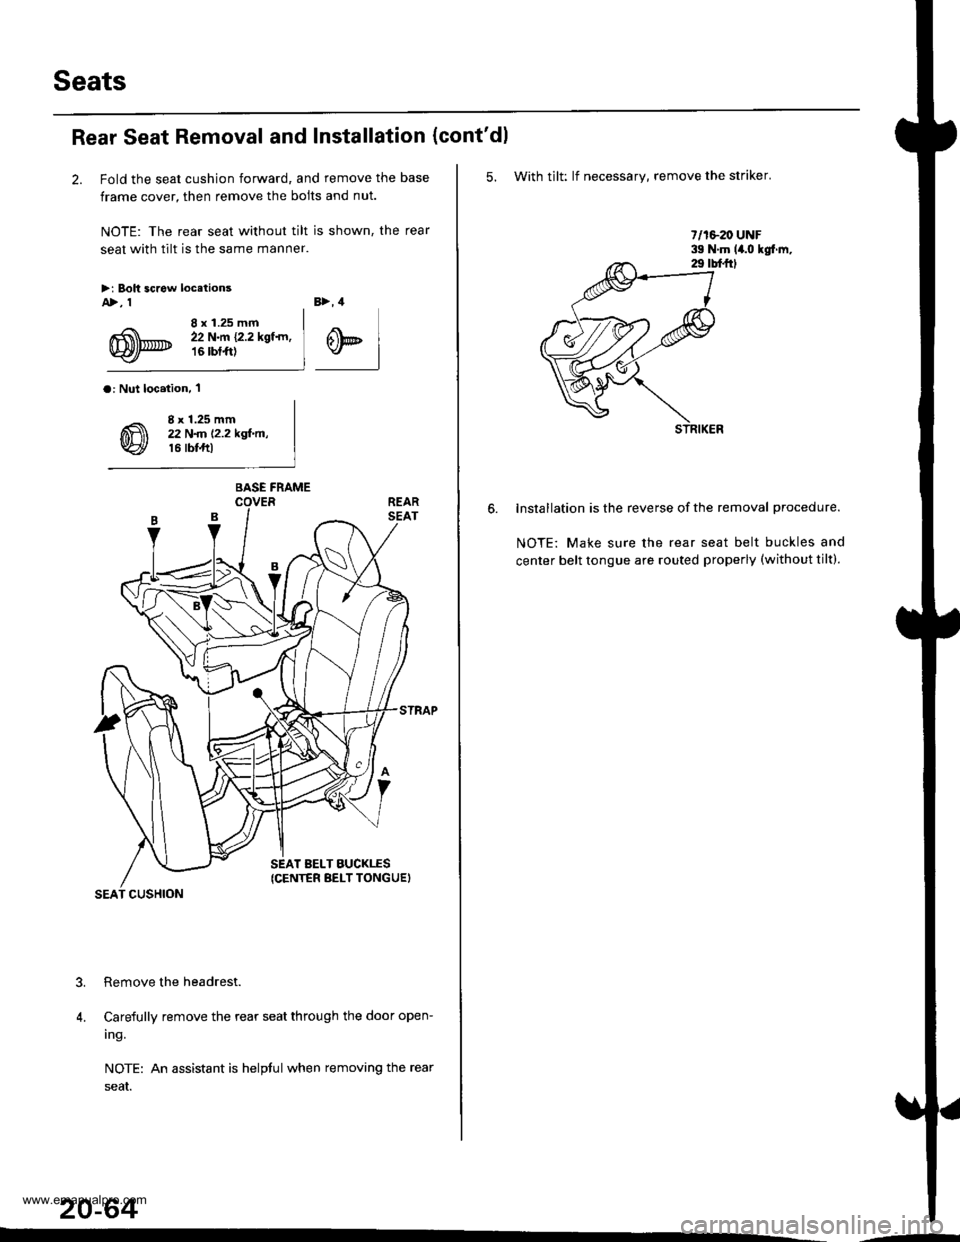 HONDA CR-V 1998 RD1-RD3 / 1.G Workshop Manual 
Seats
Rear Seat Removal and Installation
2. Fold the seat cushion forward, and remove the base
frame cover, then remove the bolts and nut.
NOTE: The rear seat without tilt is shown, the rear
seat wit